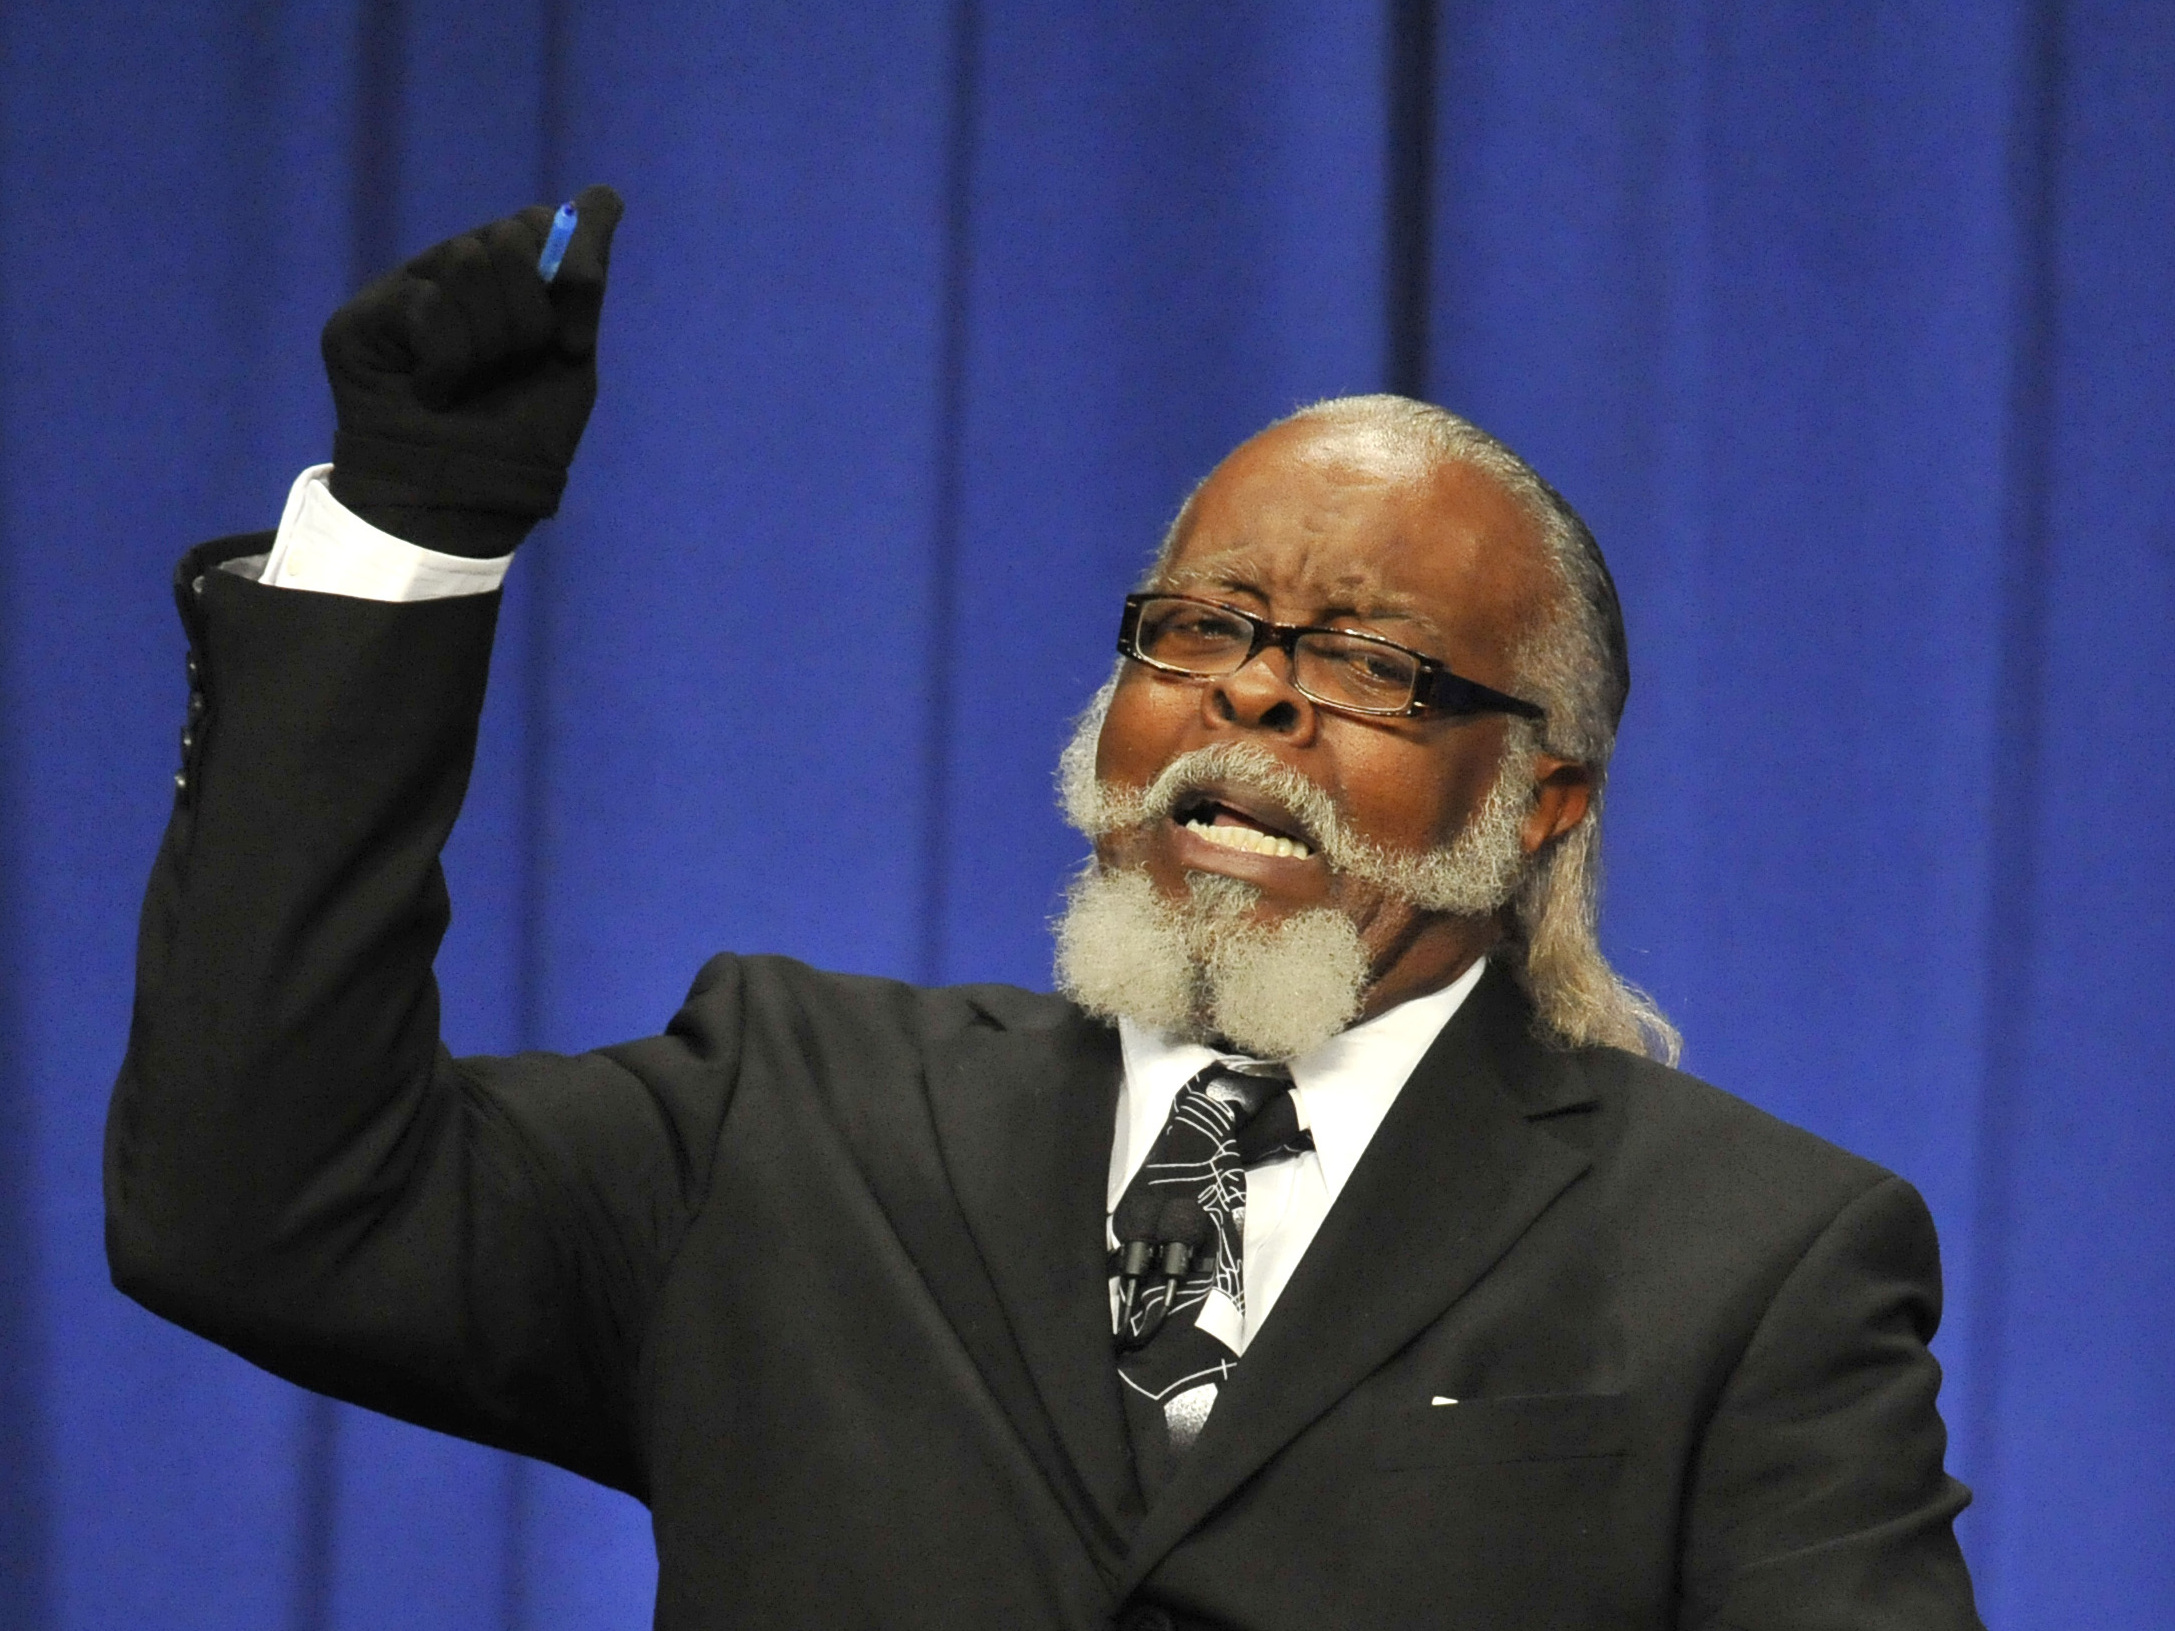 things that cost more than they're worth - not worth the price -rent is too damn high